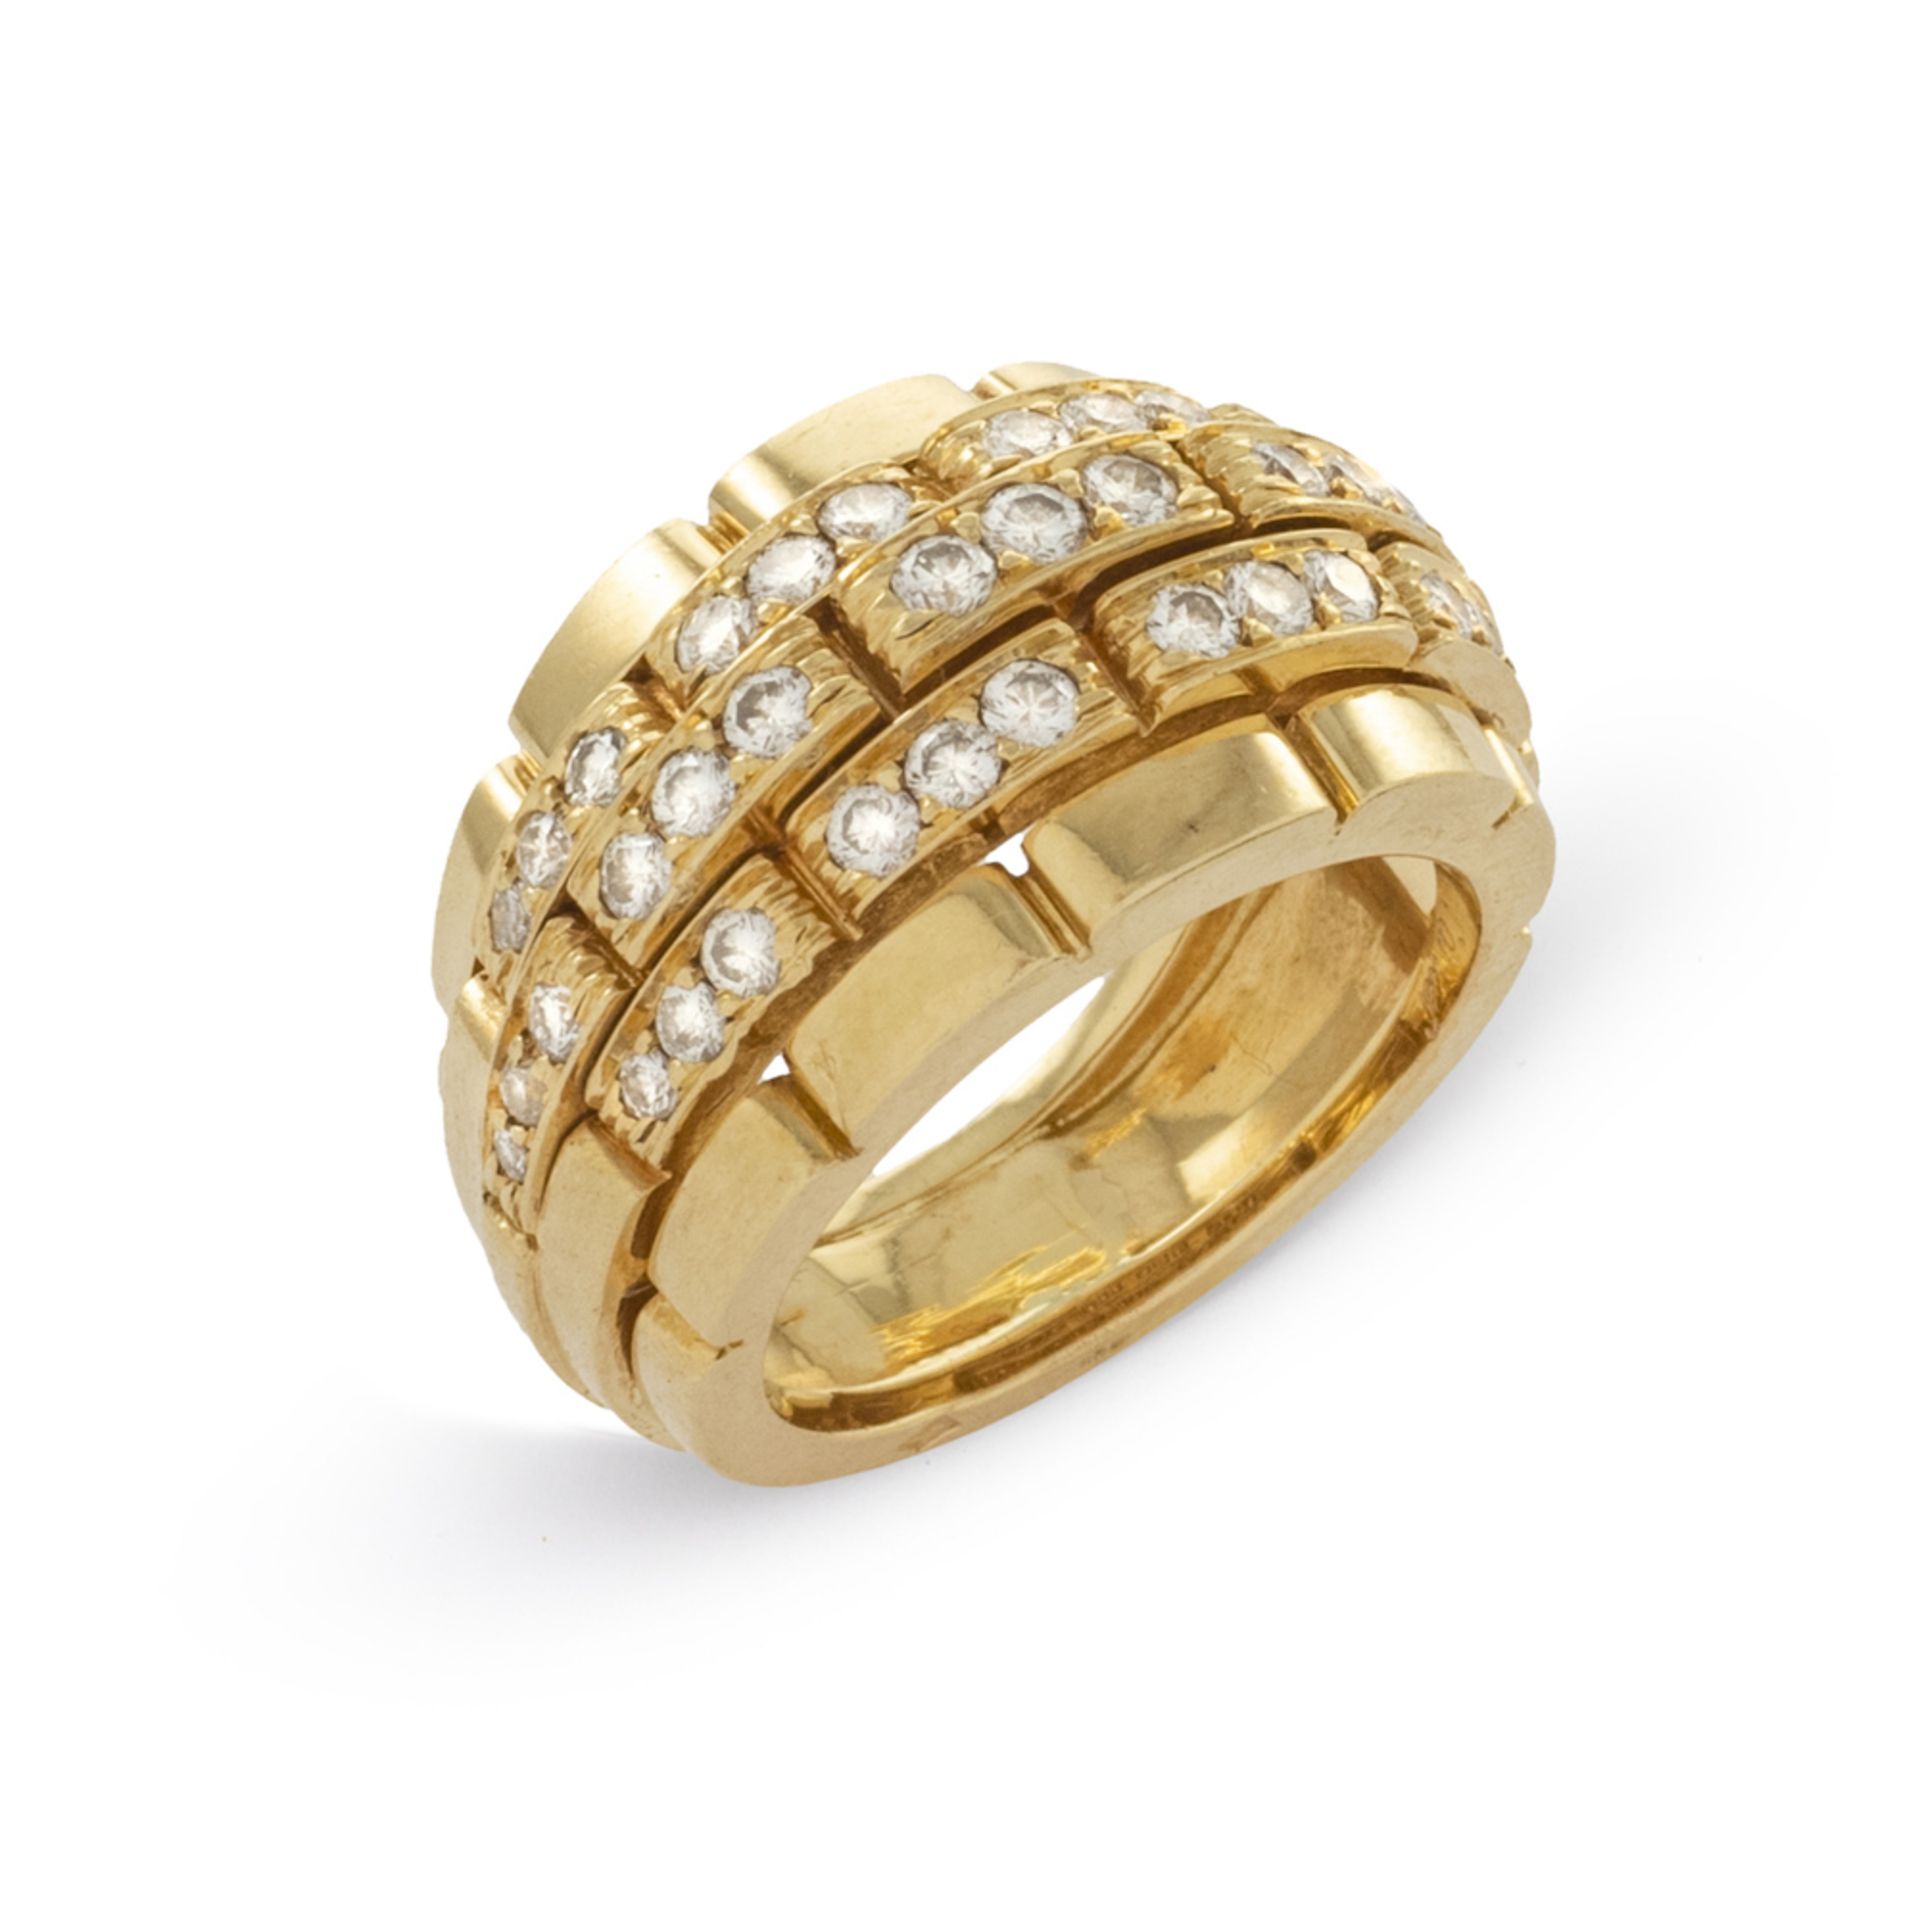 Cartier Maillon Panthère collection ring